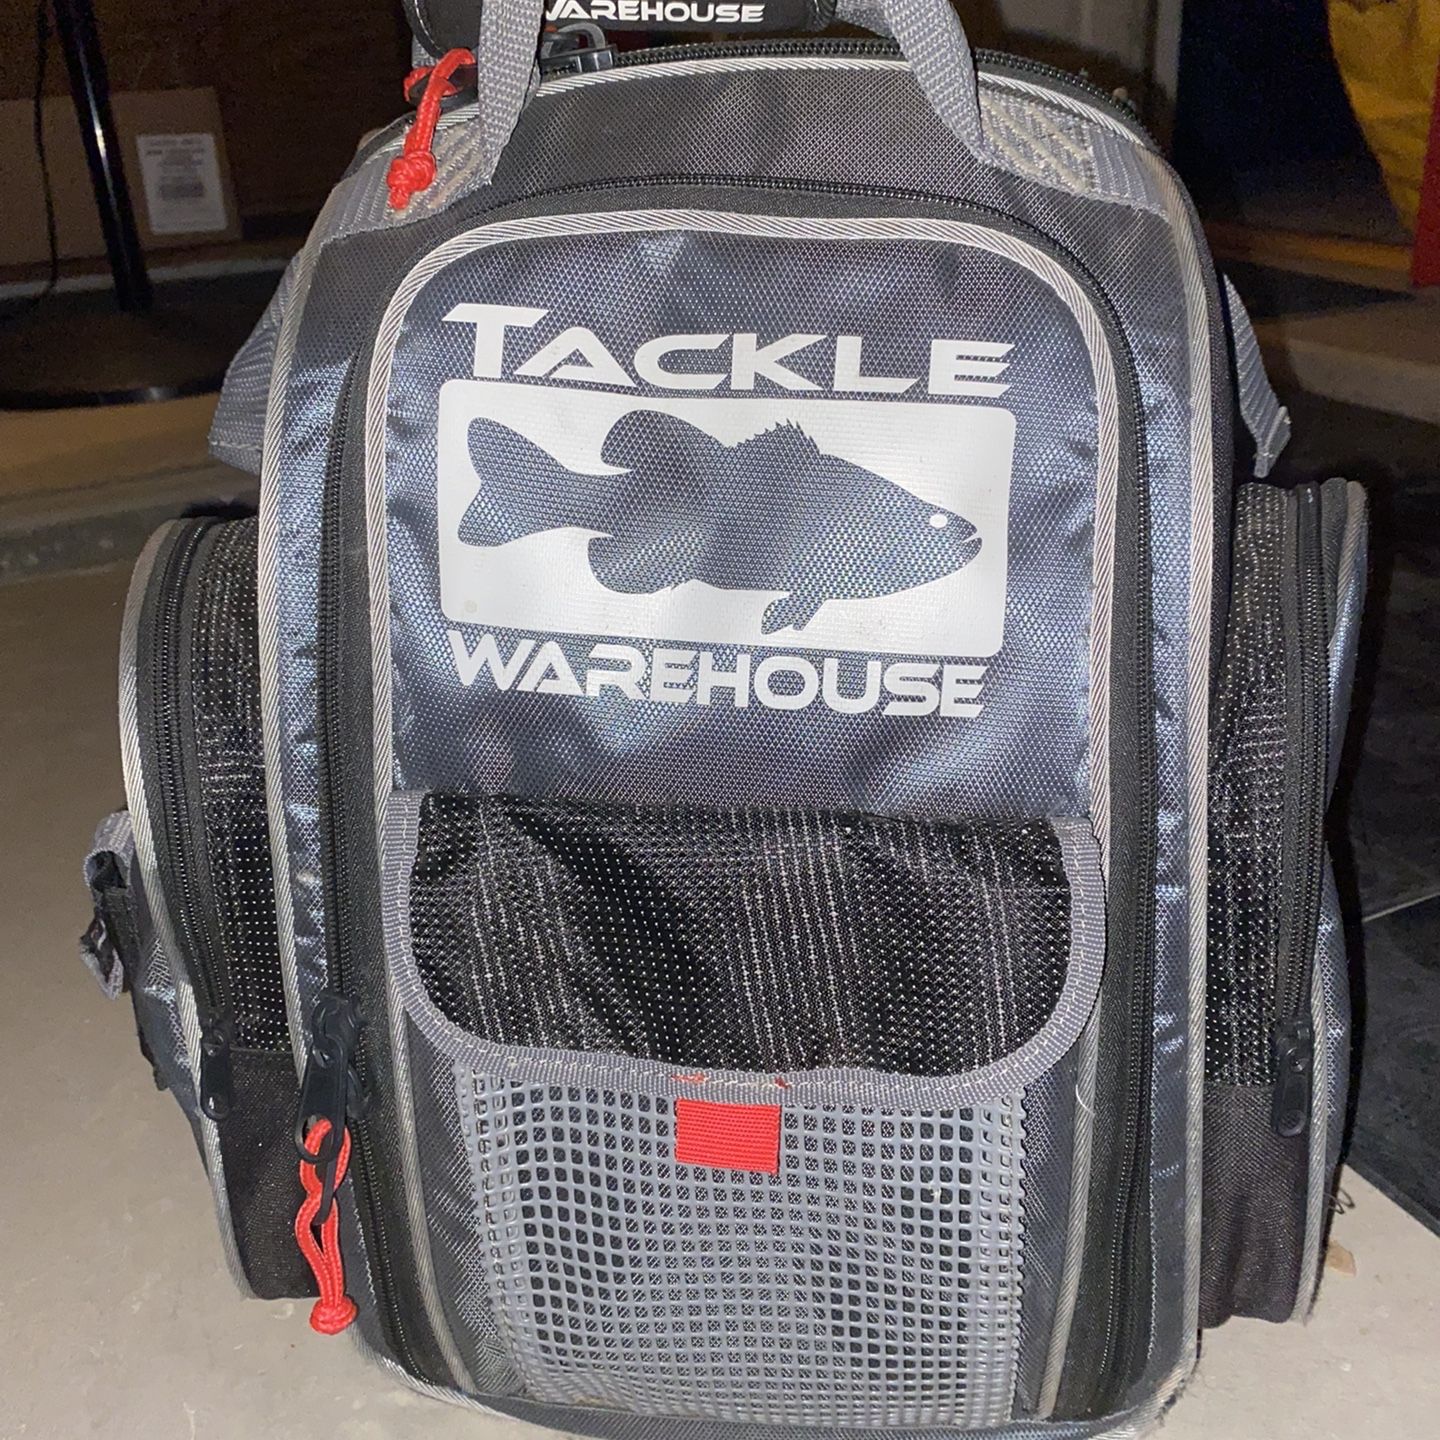 Tackle warehouse fishing backpack for Sale in Bakersfield, CA